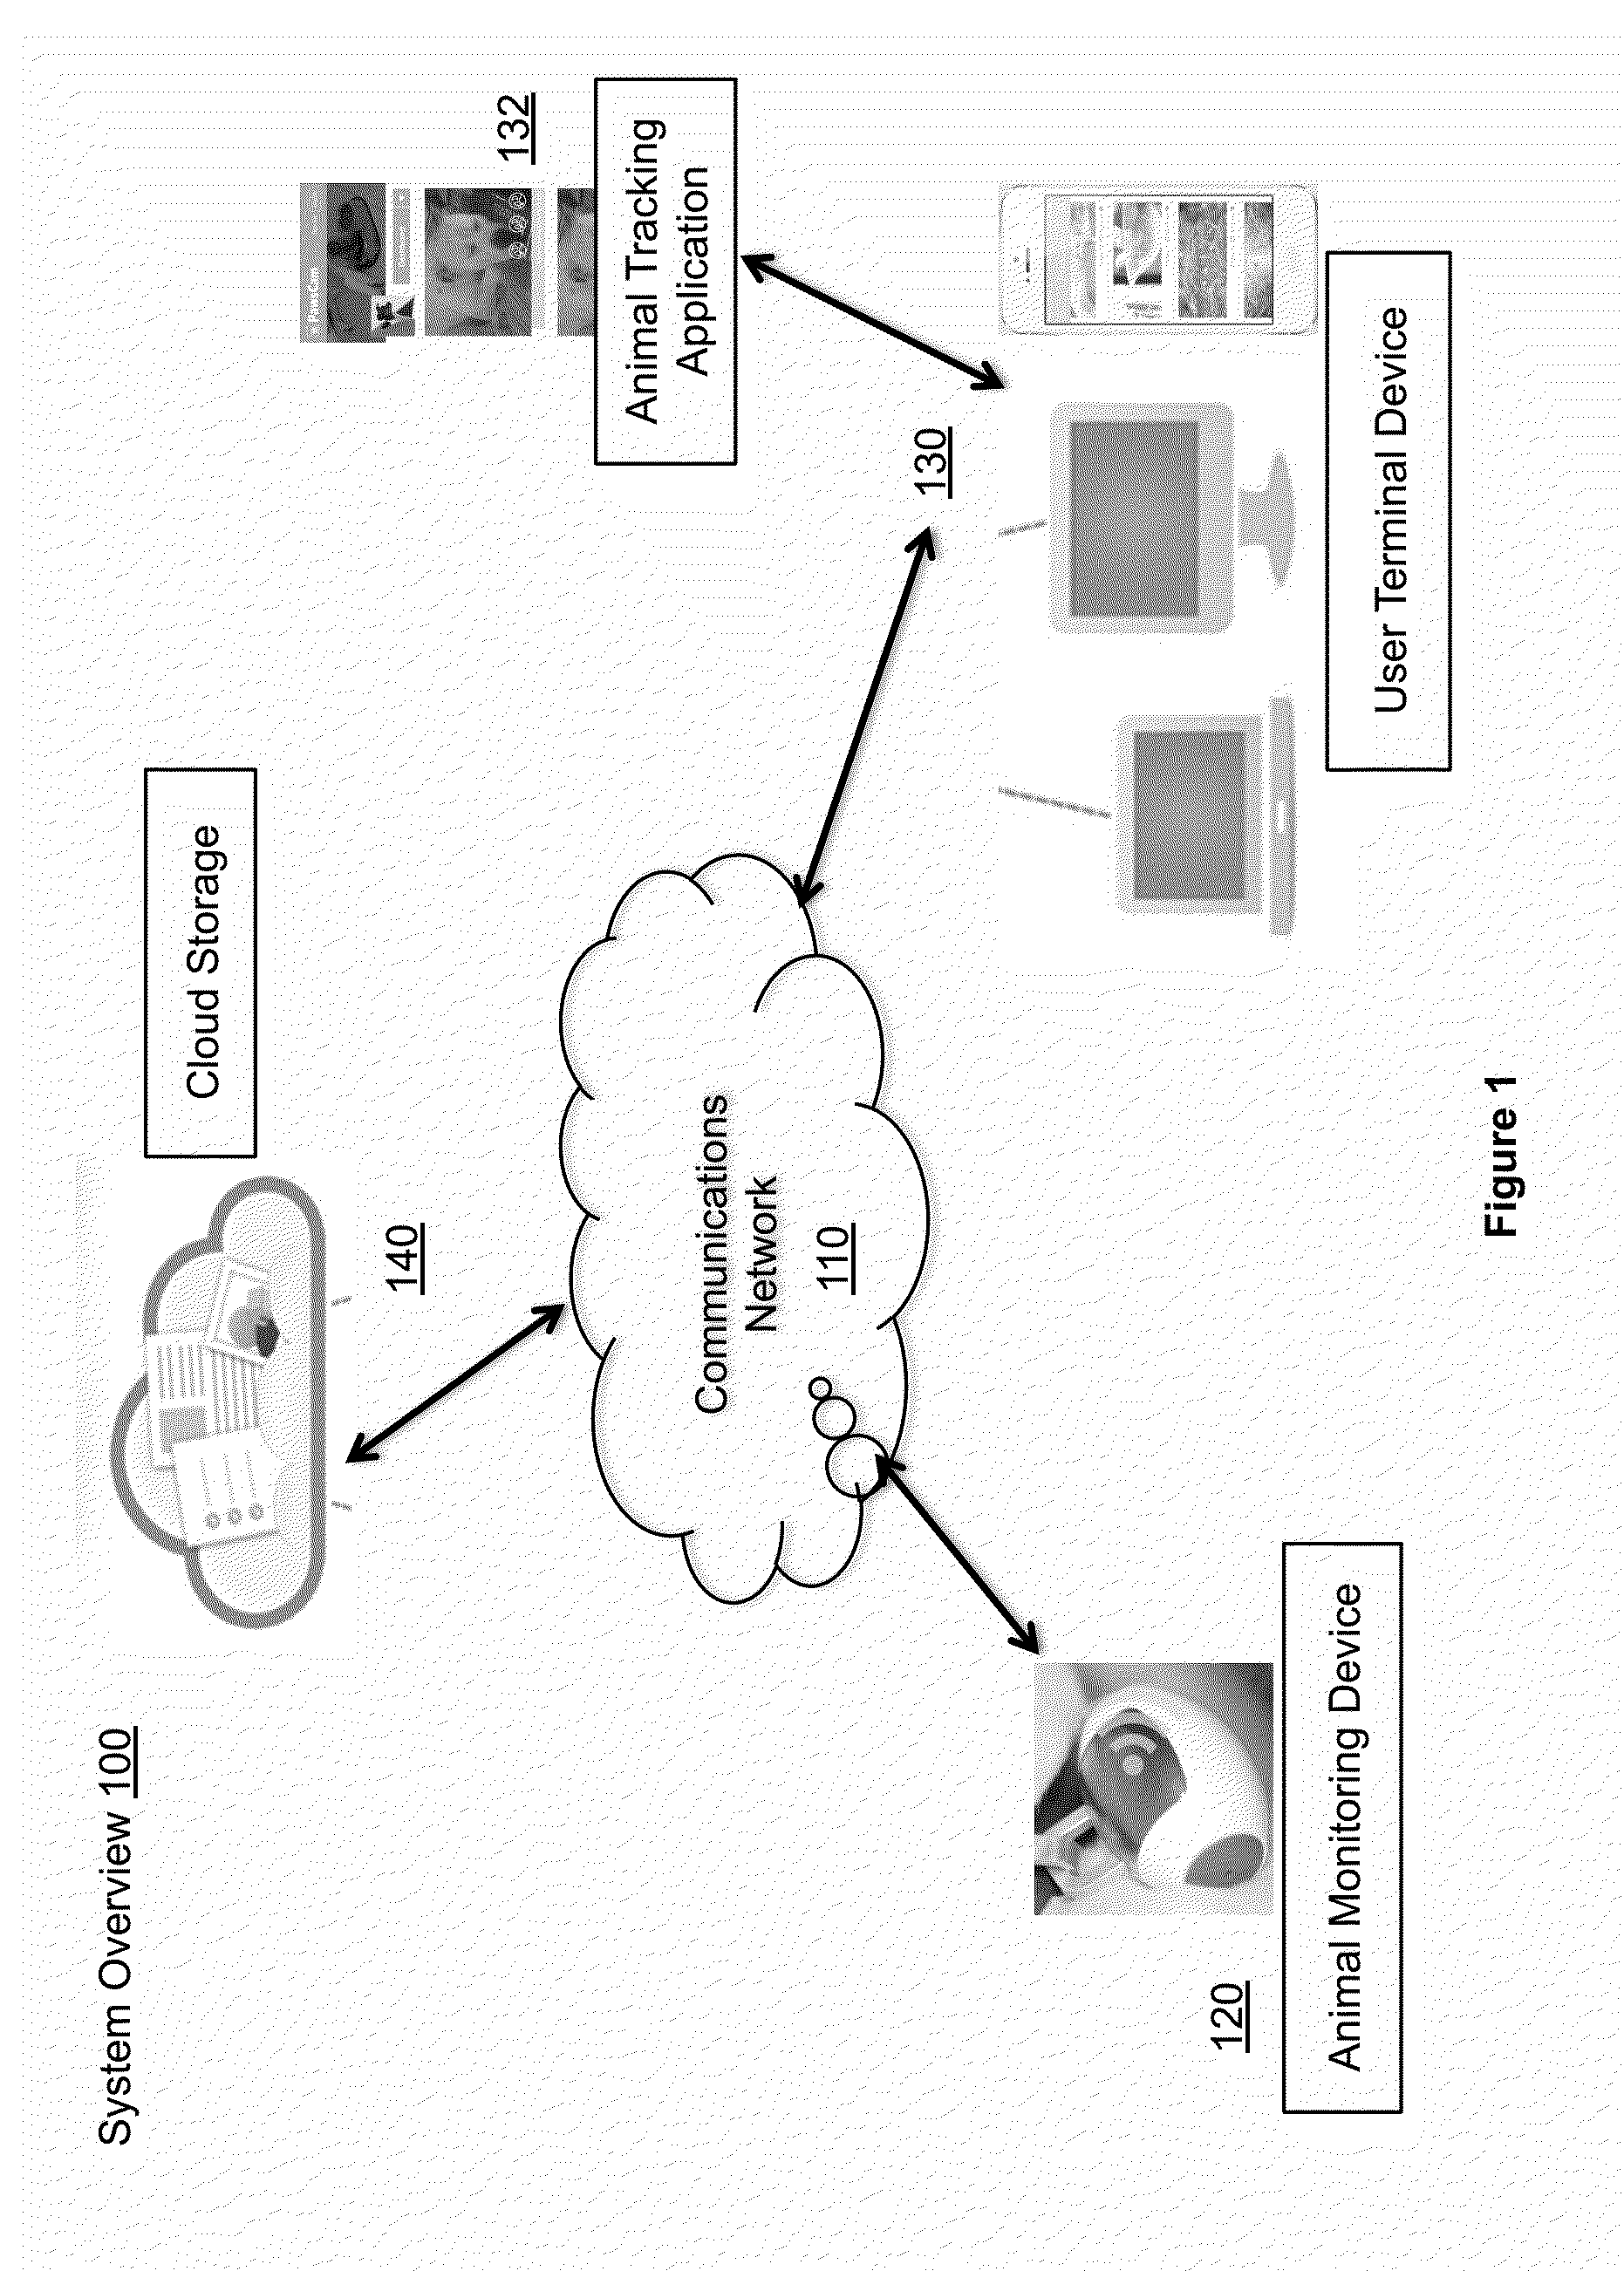 Methods and Apparatus for Tracking and Analyzing Animal Behaviors